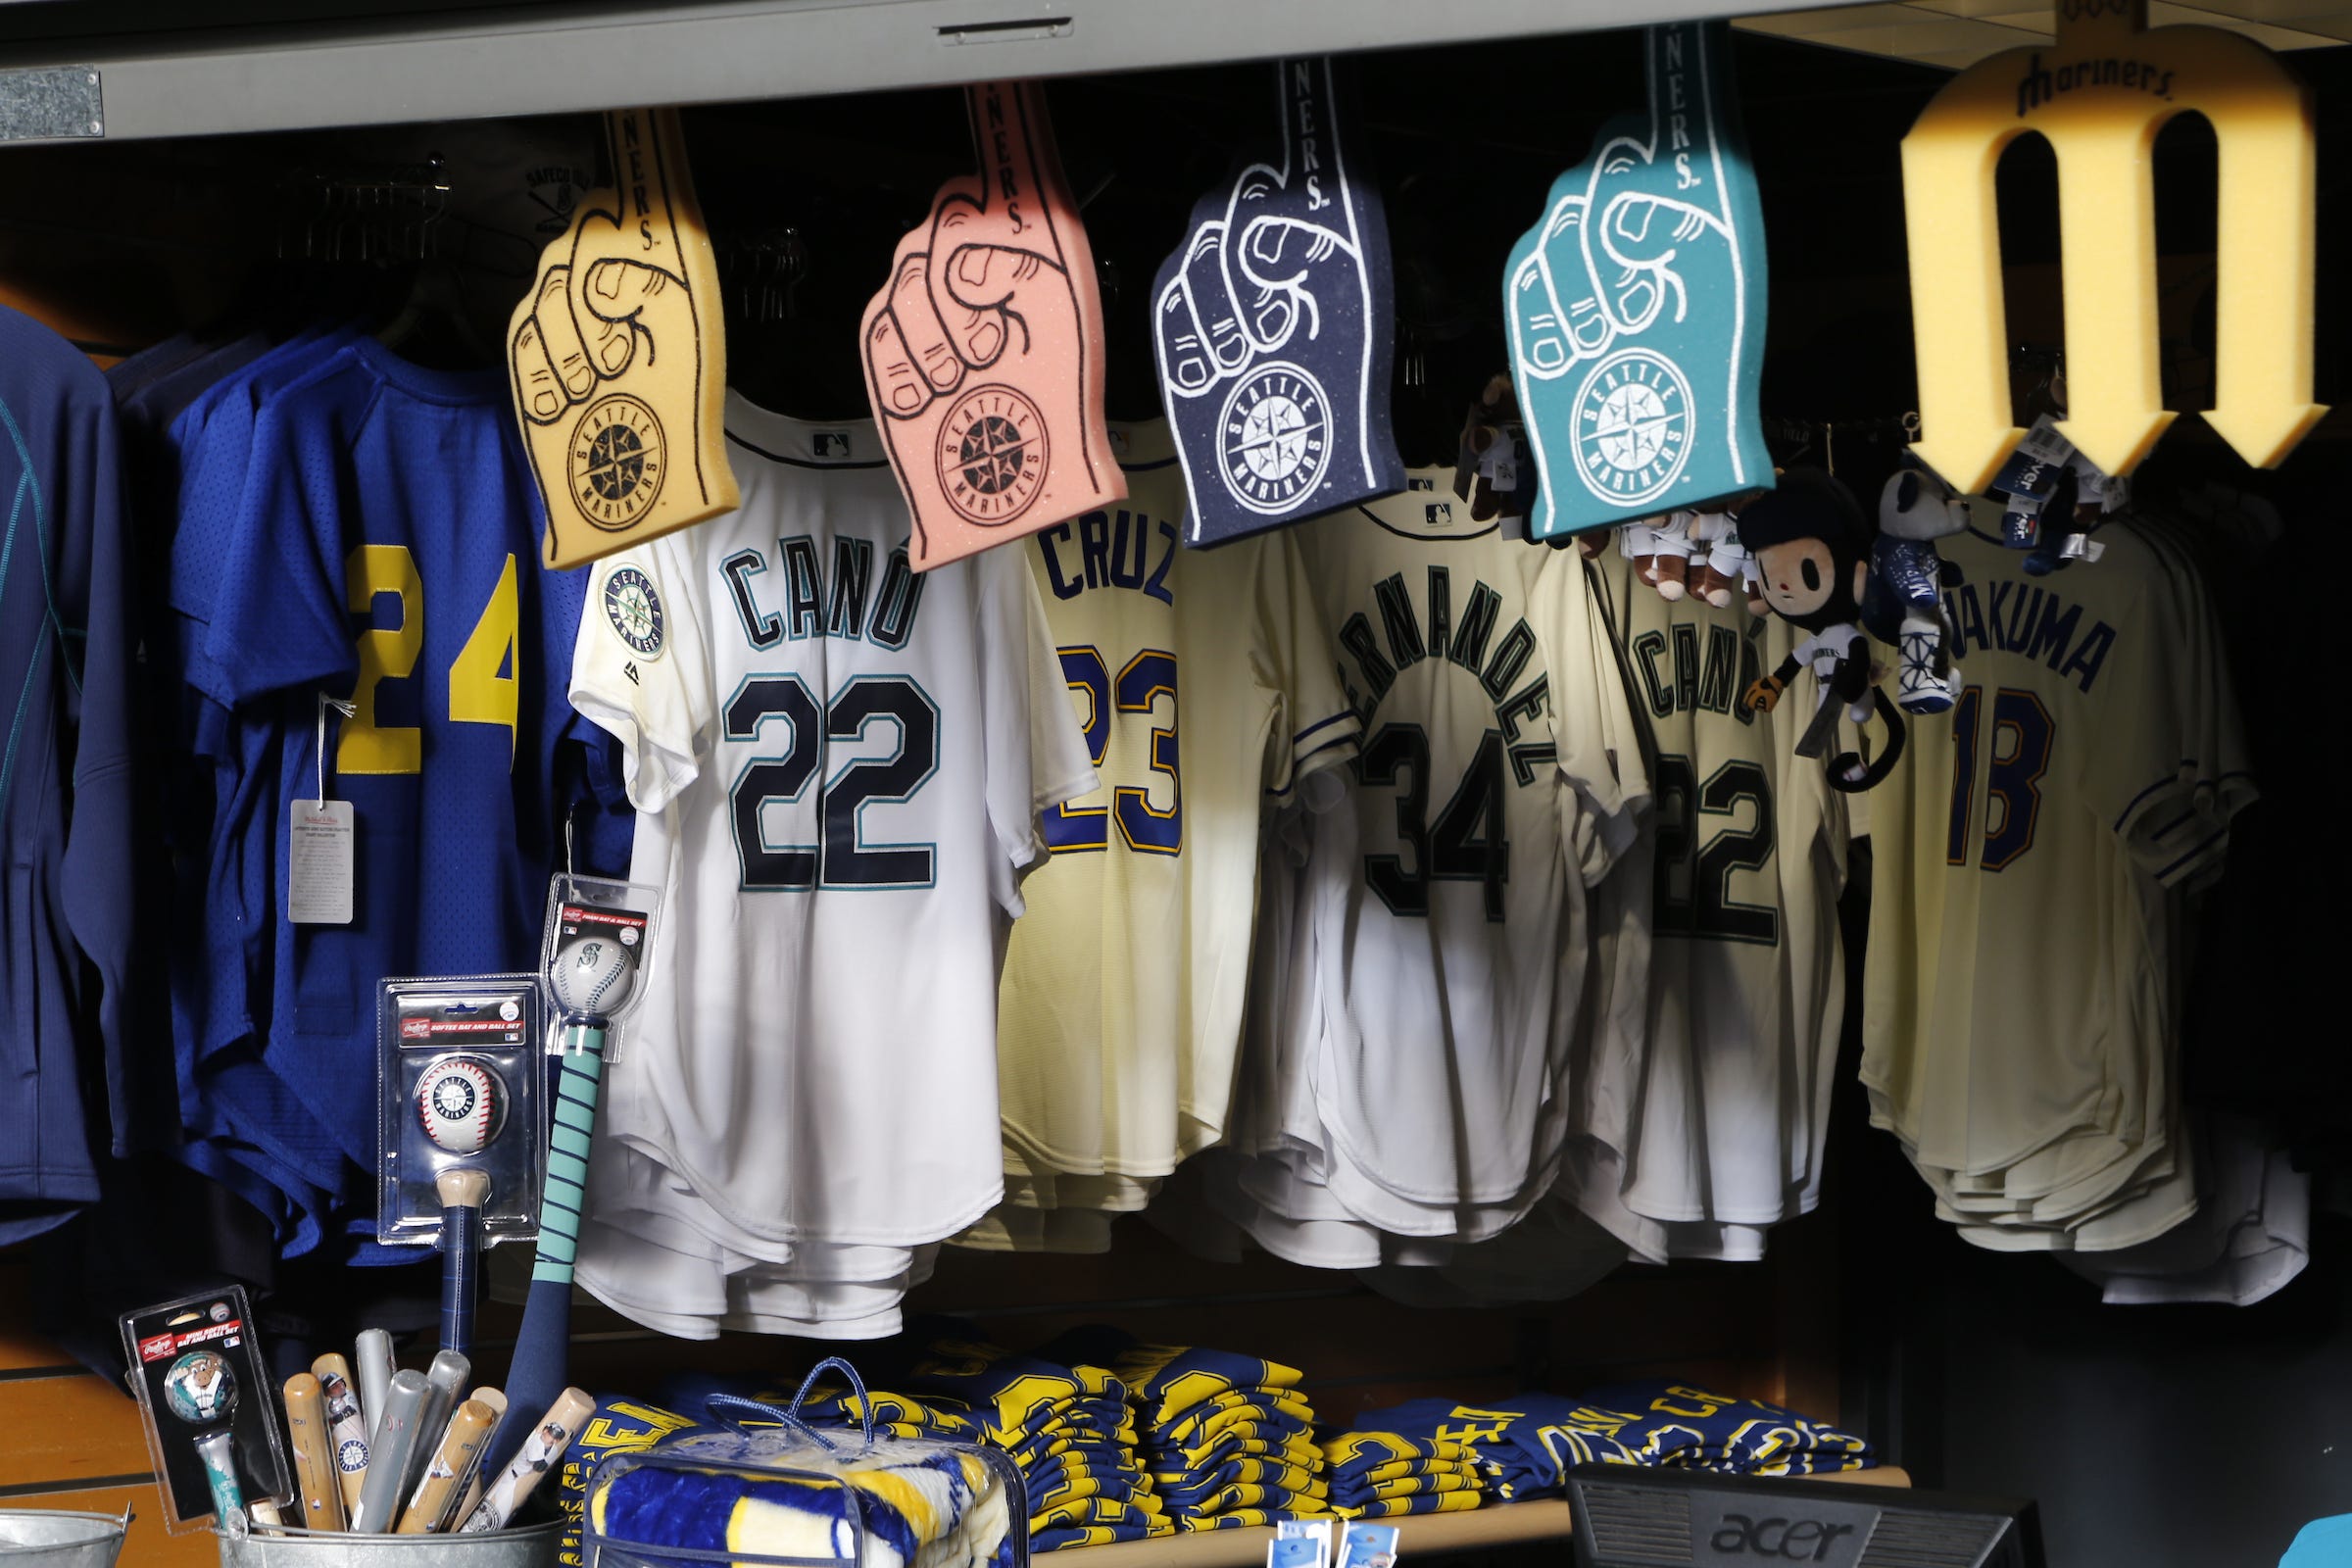 Holiday Events at Mariners Team Stores, by Nathan Rauschenberg